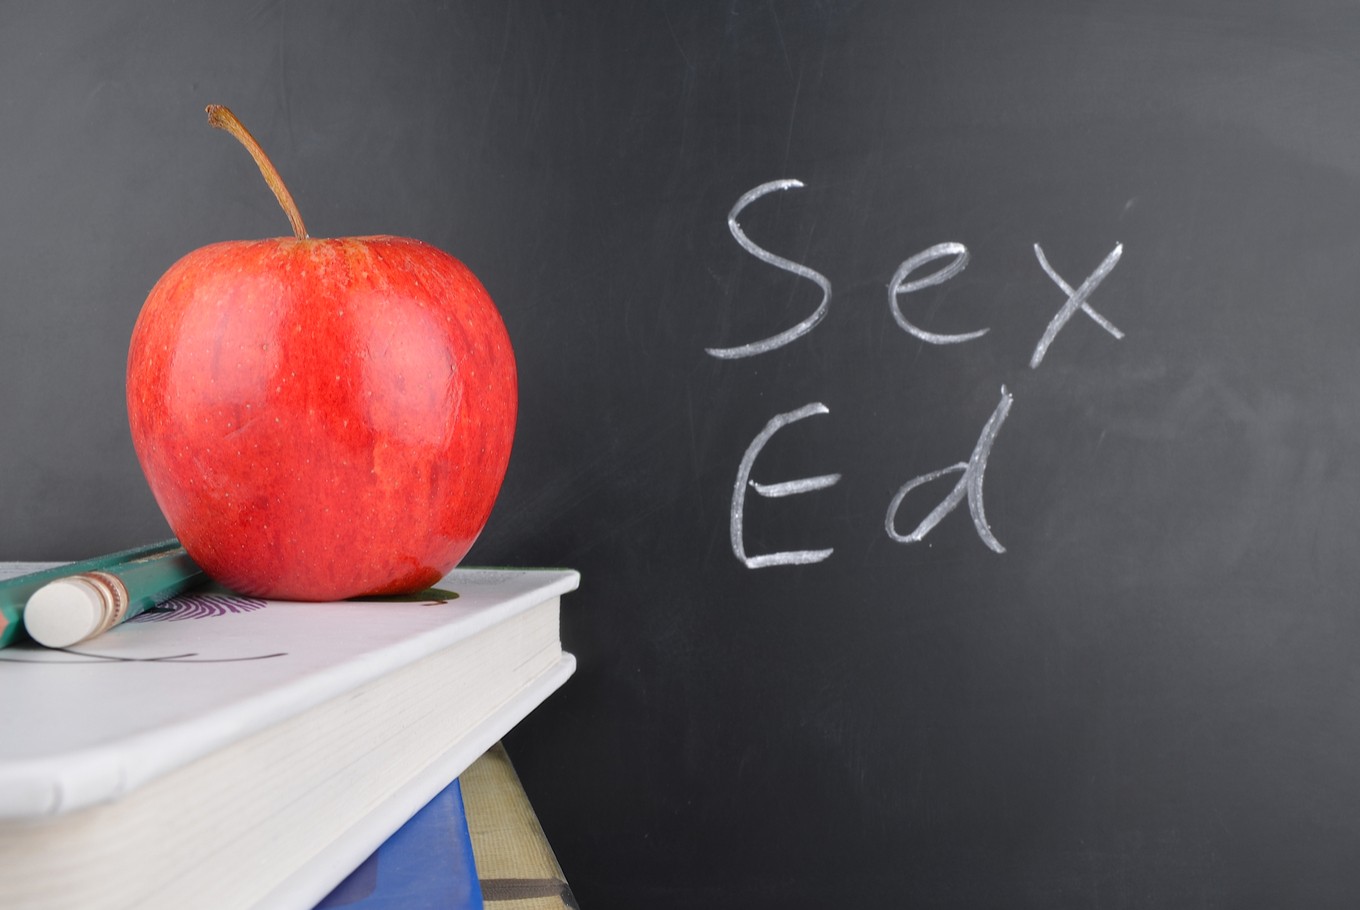 How to start teaching children about sex - Parents - The Jakarta Post